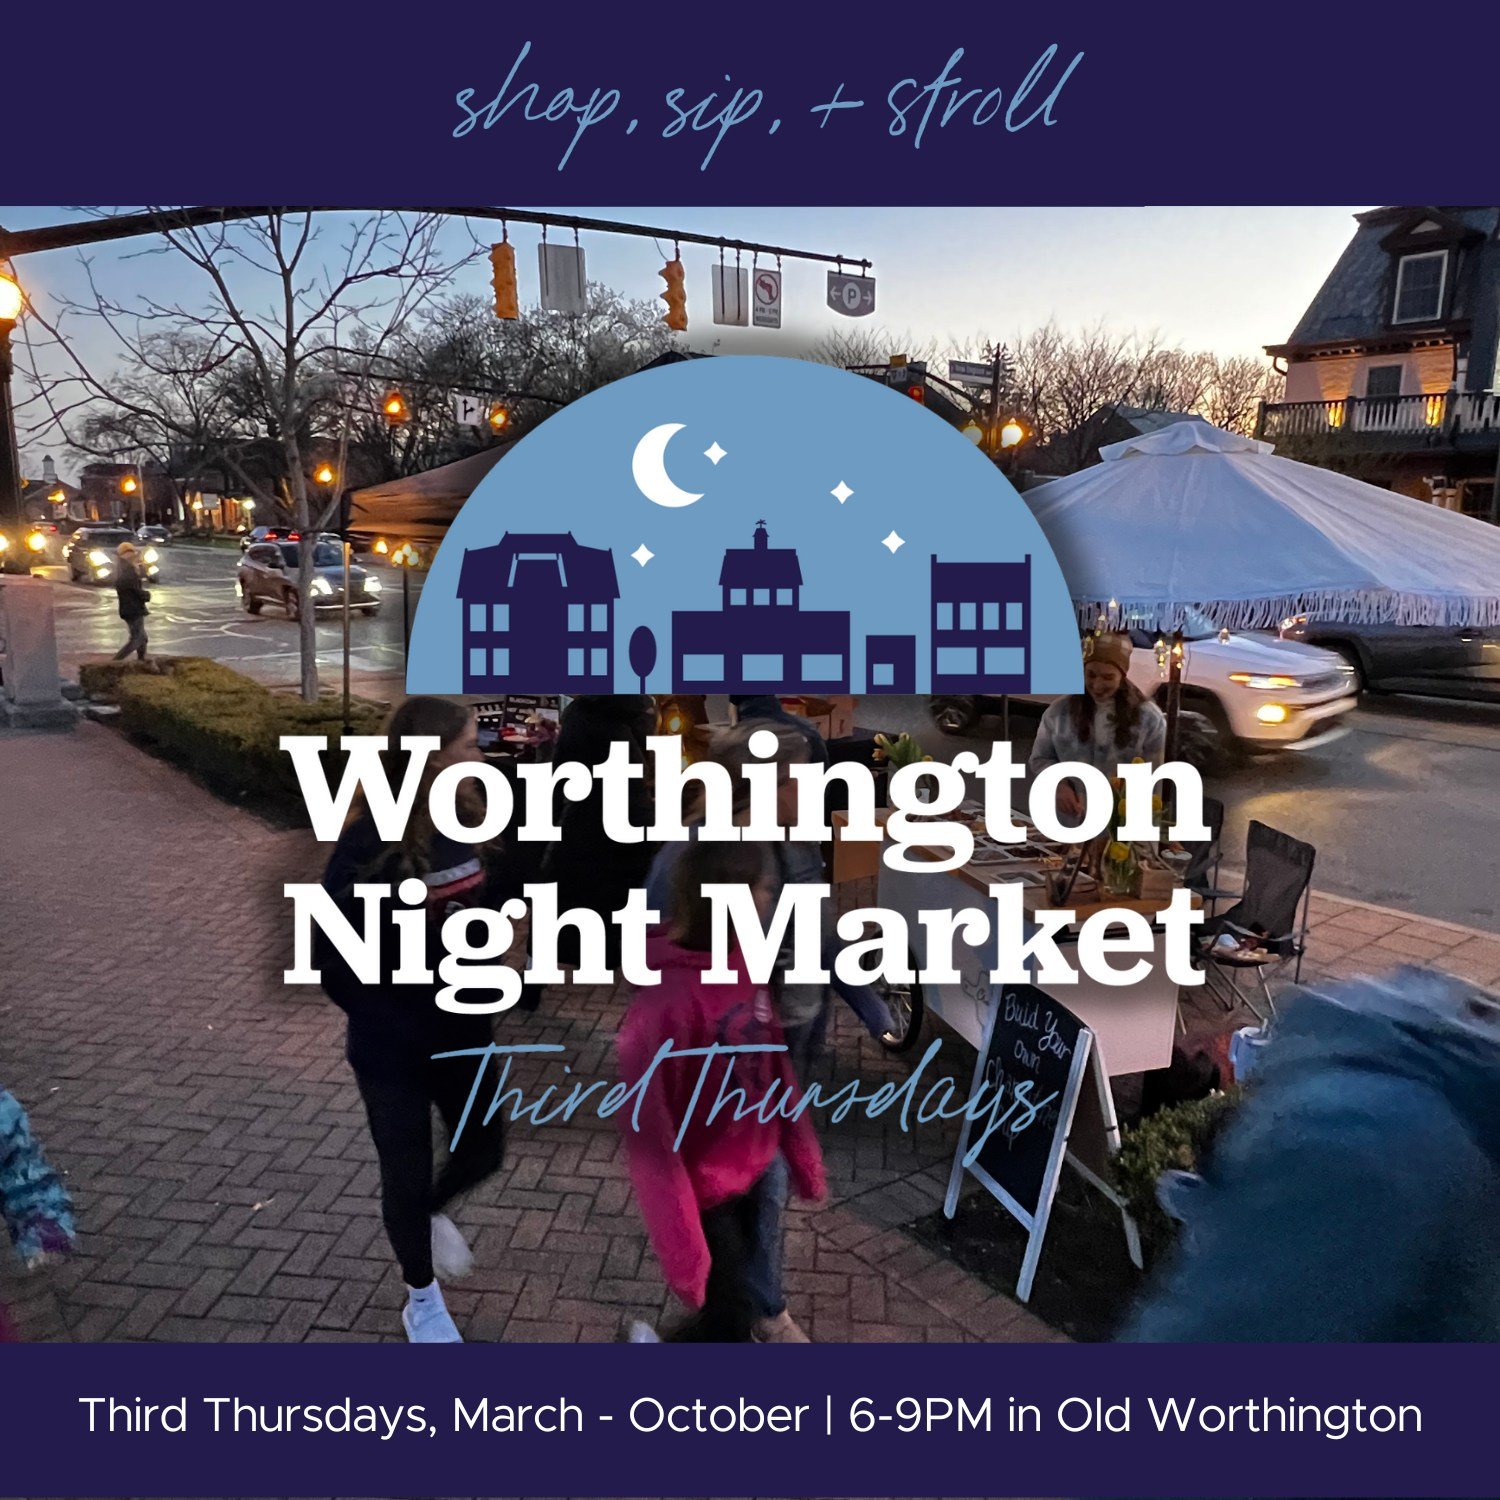 Mark your calendars - the April Worthington Night Market coming up on the Third Thursday, April 18 from 6-9PM. Visit our merchants, check out the DJ, food truck, and these great merchants:

Angie's Rainbow Cookies 
Pawson Dog Treat Co. 
Underworld Fe